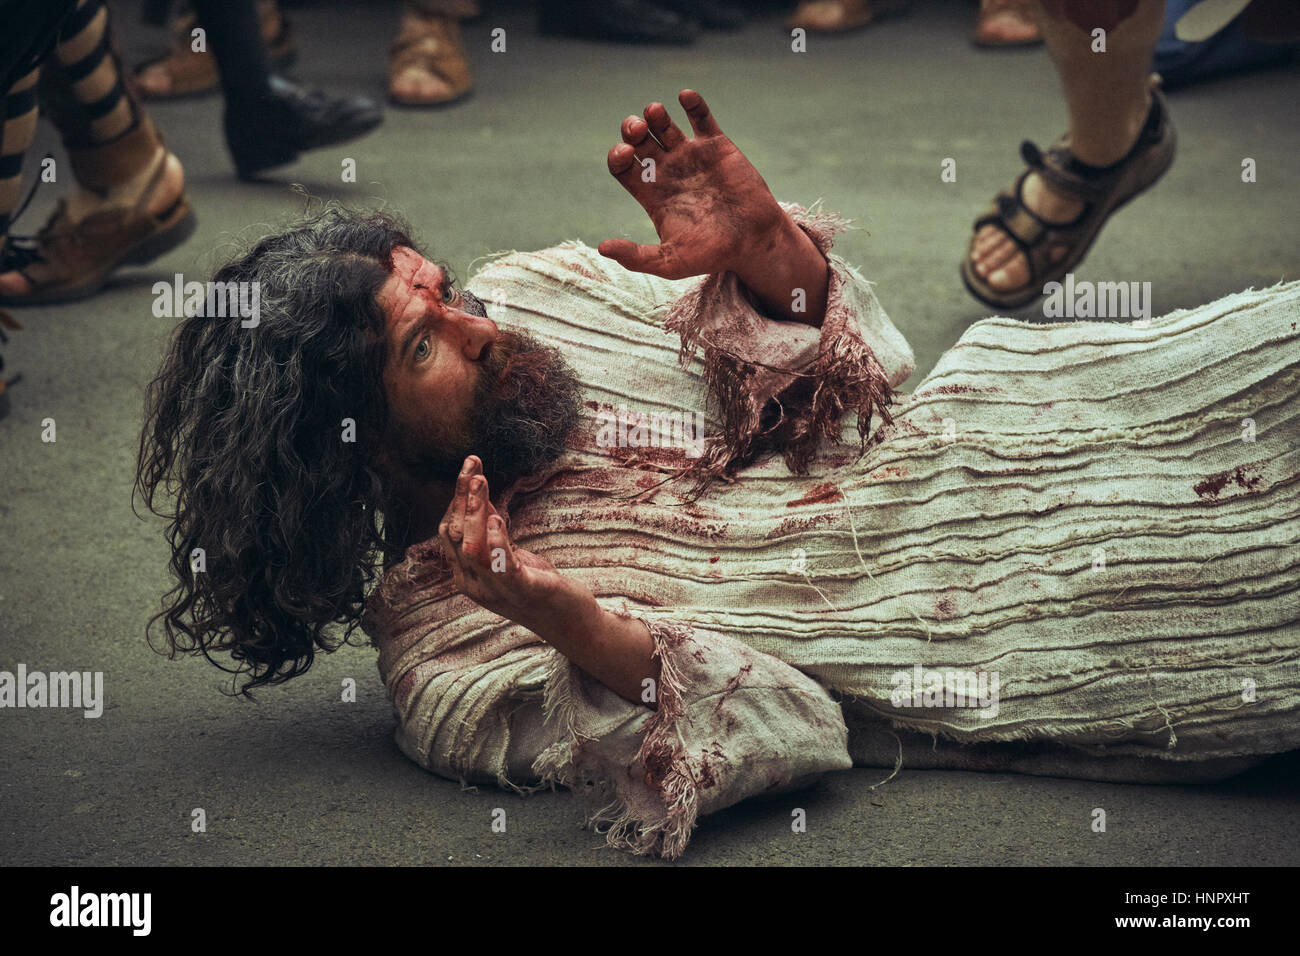 Man plays suffering Jesus Christ, wounded and tortured during the reenactment of the Way of Sorrows on Good Friday, April 15, 2014, Bucharest, Romania Stock Photo